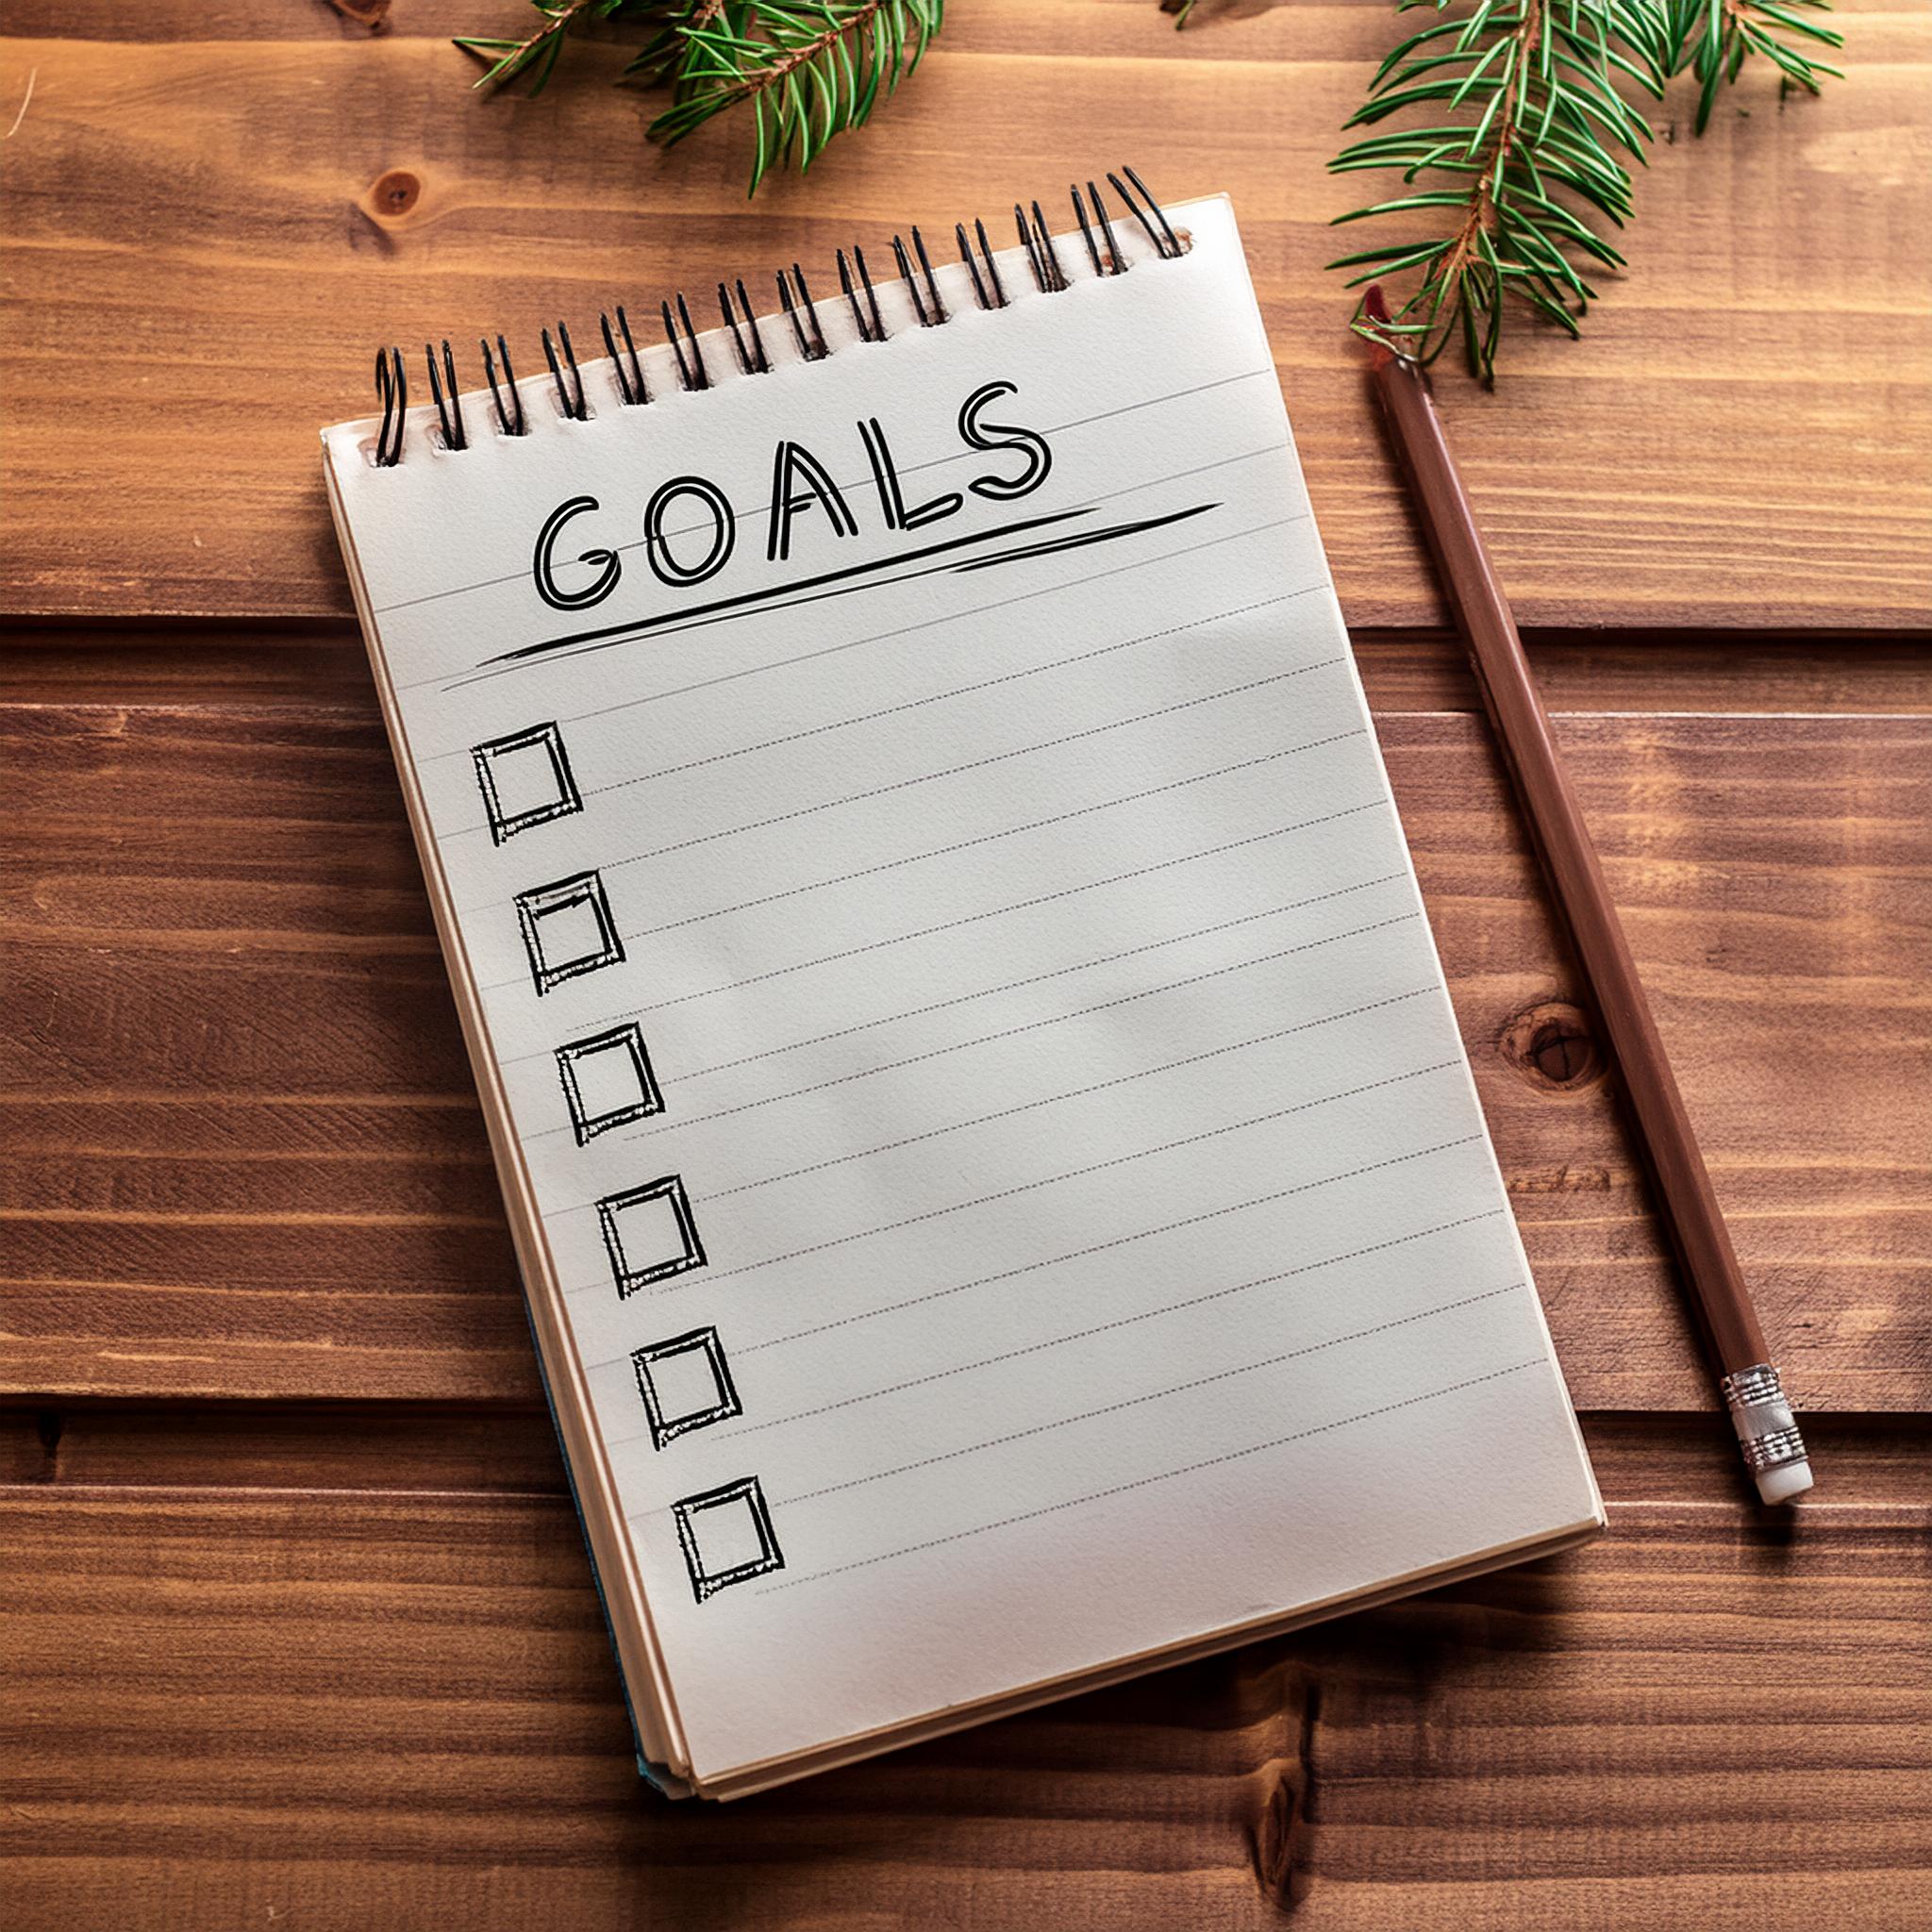 My goals for a great and successful gap year